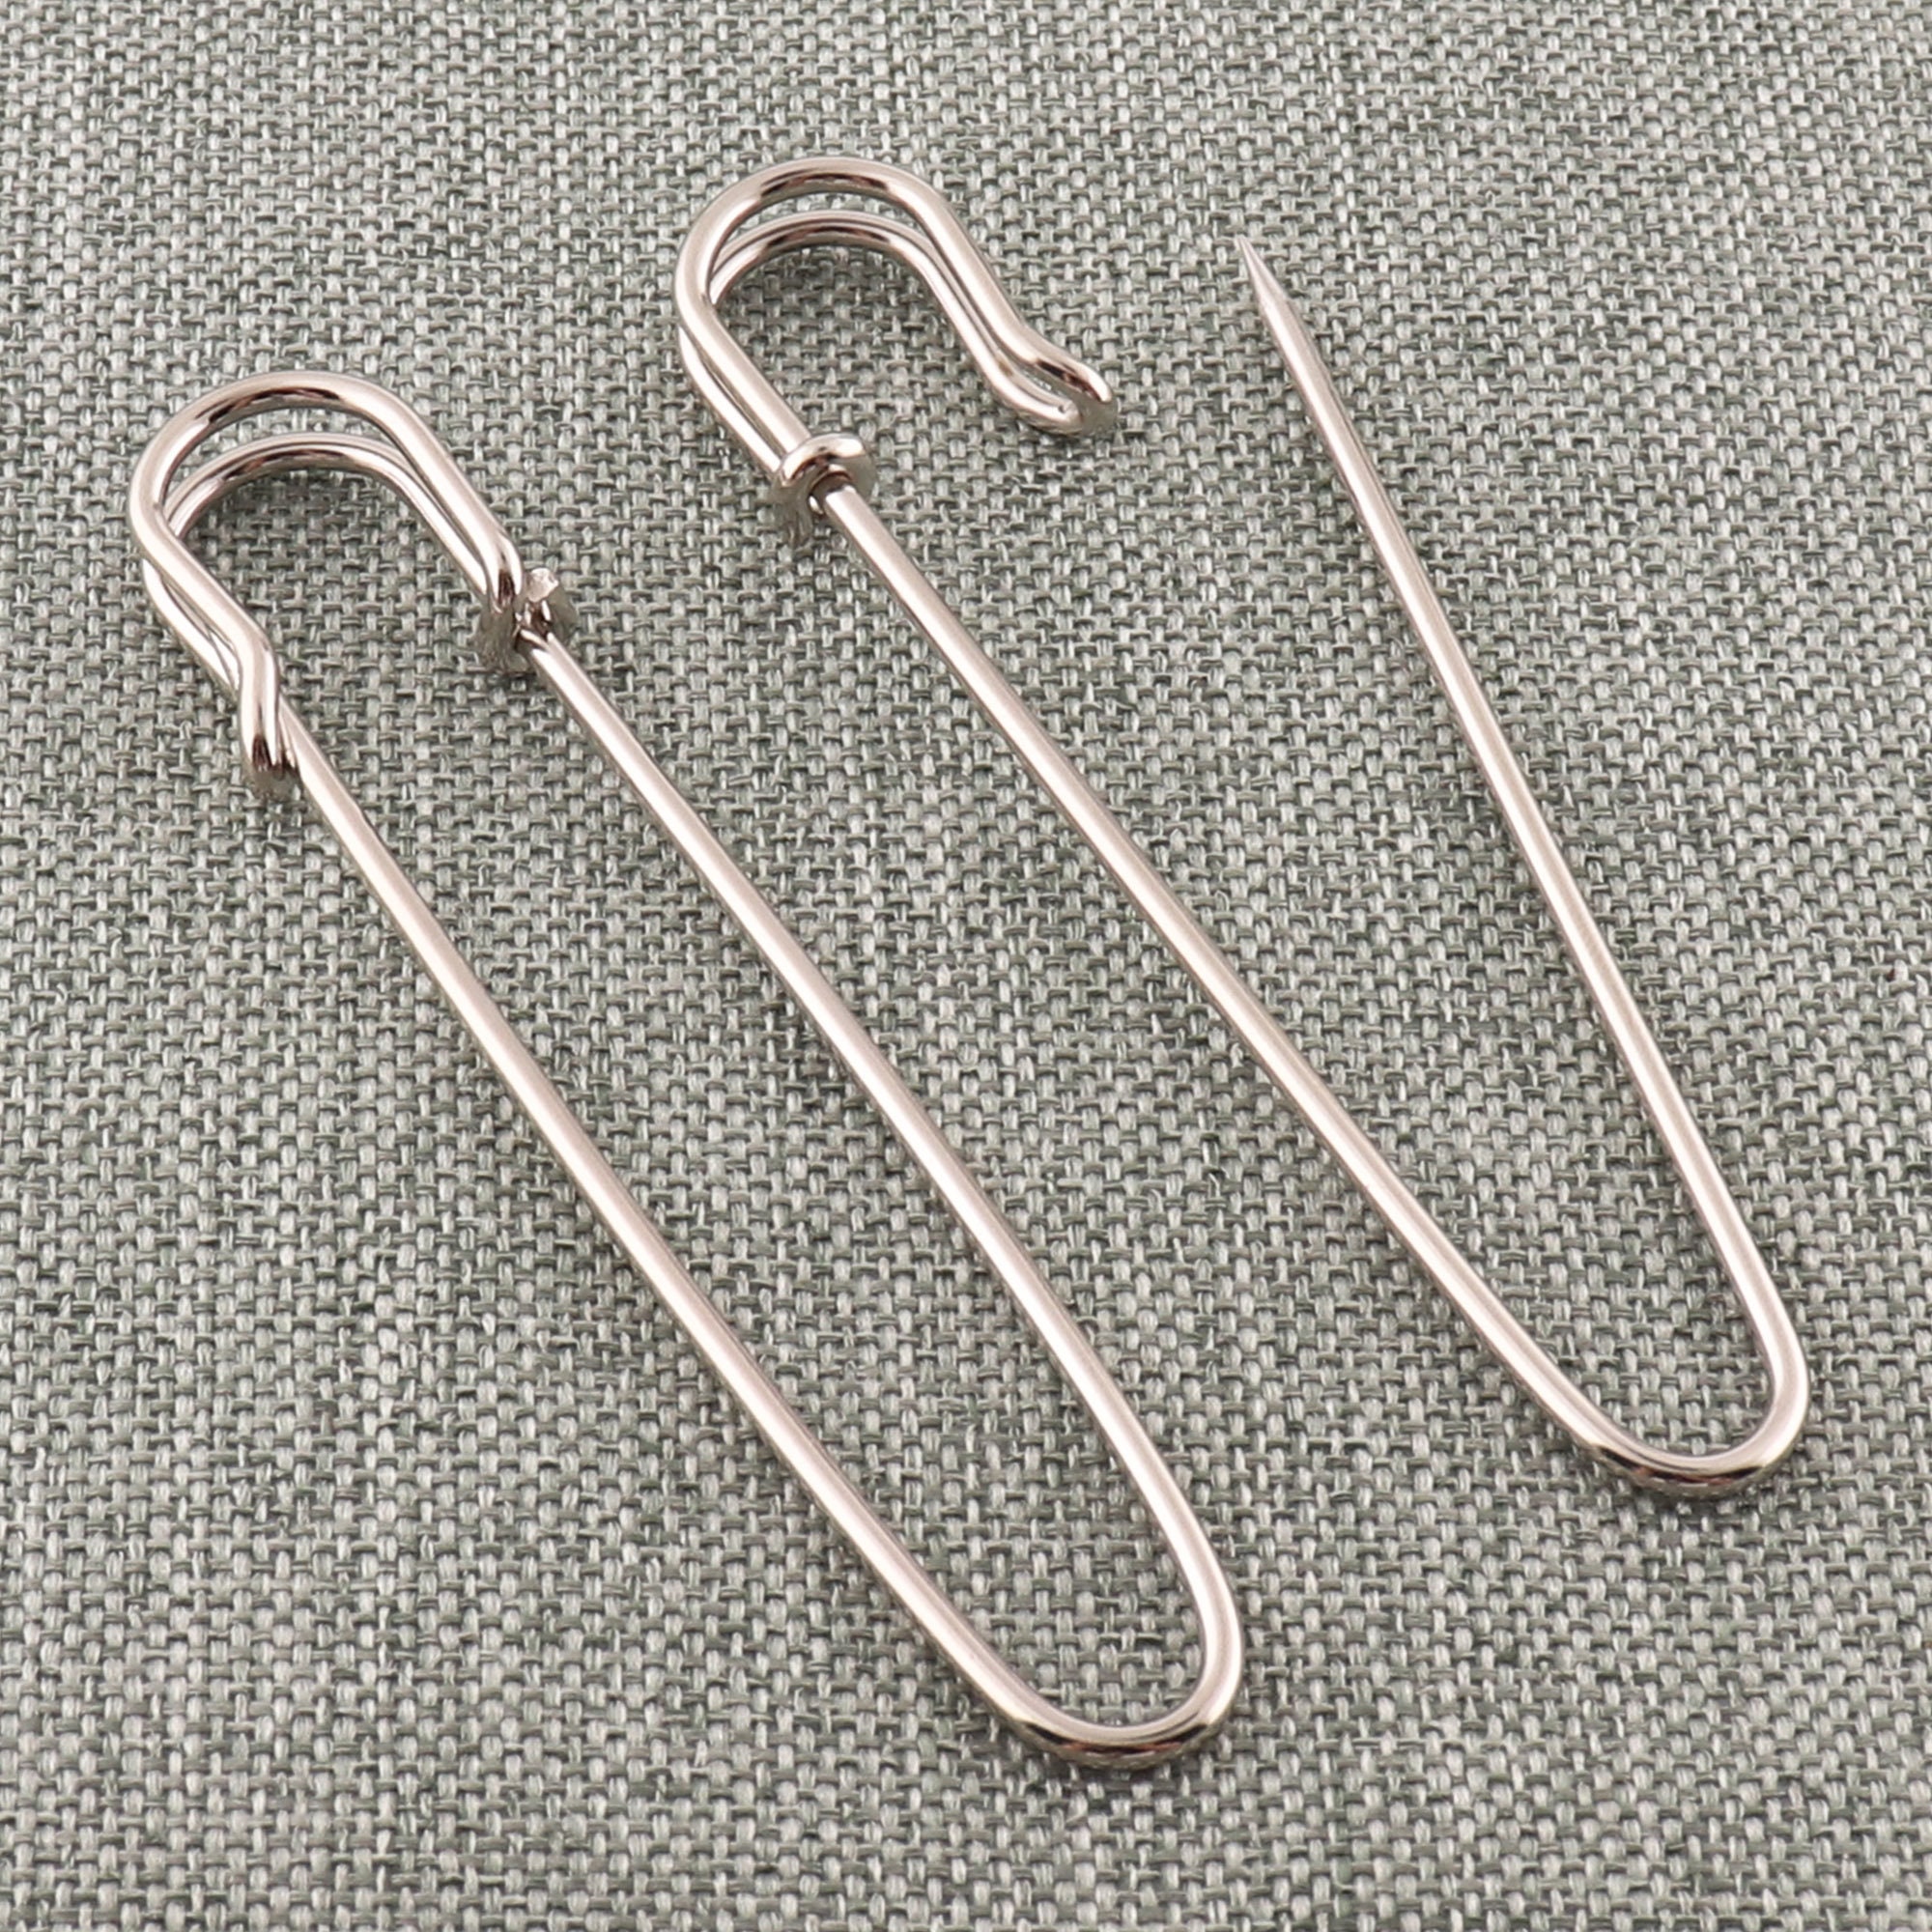  60pcs Large Safety Pins 2.75 Silver Spring Lock Pins Big  Safety Pins Heavy Duty for Fashion, Sewing, Quilting, Blankets, Upholstery,  Laundry and Craft